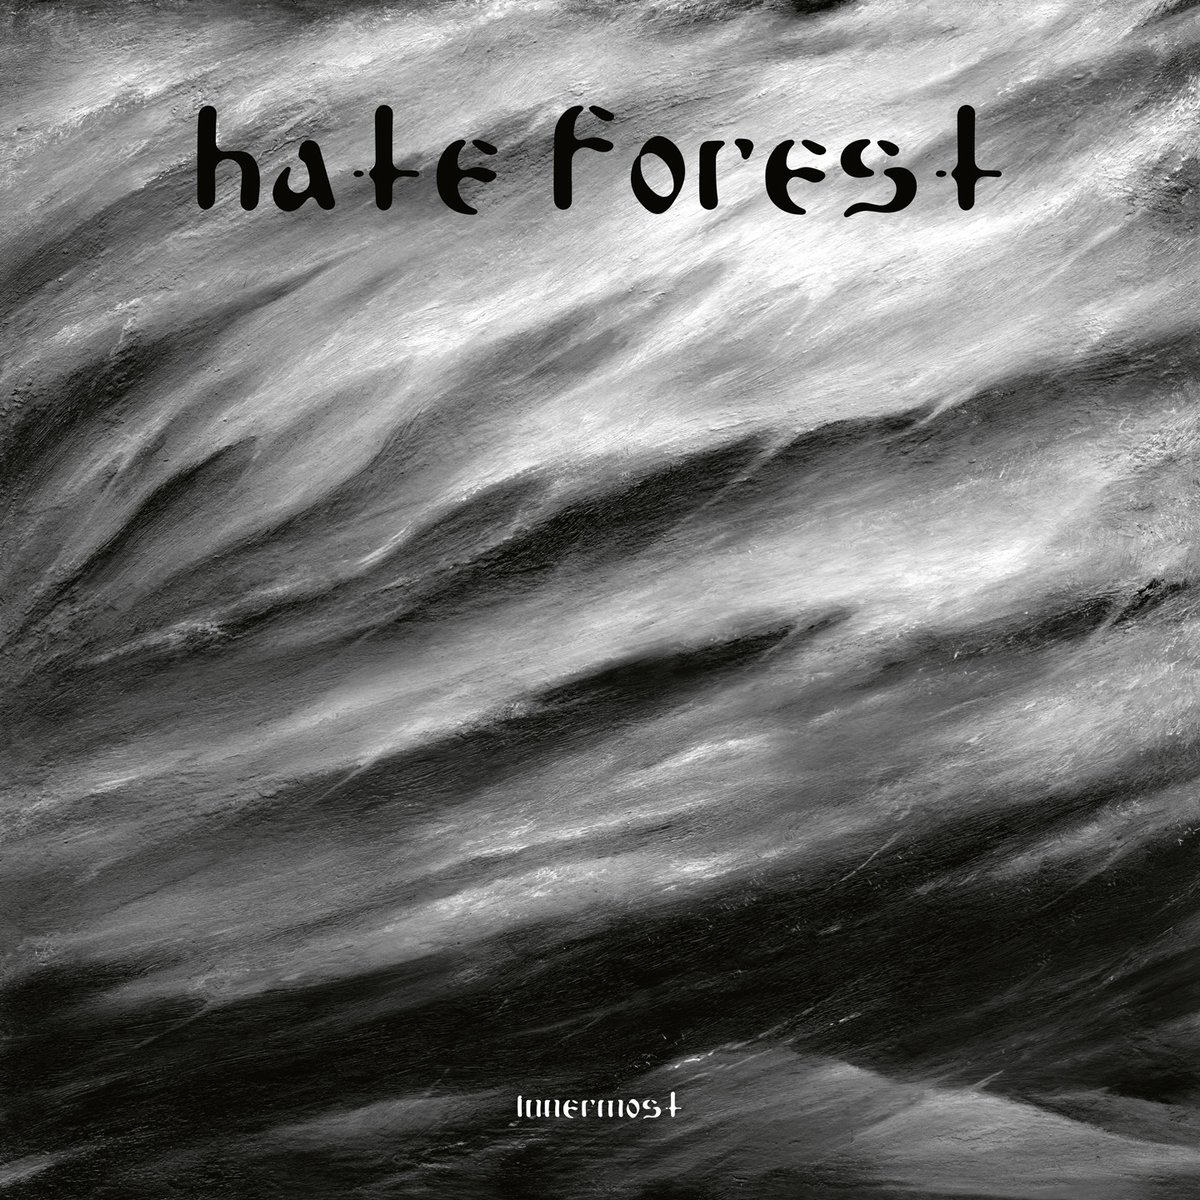 Prolific Ukrainian black metal band Hate Forest release their sixth album, Innermost. Review at FFMB, flyingfiddlesticks.com/2023/01/06/hat… @OsmoseProd #metal #heavymetal #Ukraine #blackmetal #ambientmetal #OsmoseProductions #HateForest #Innermost